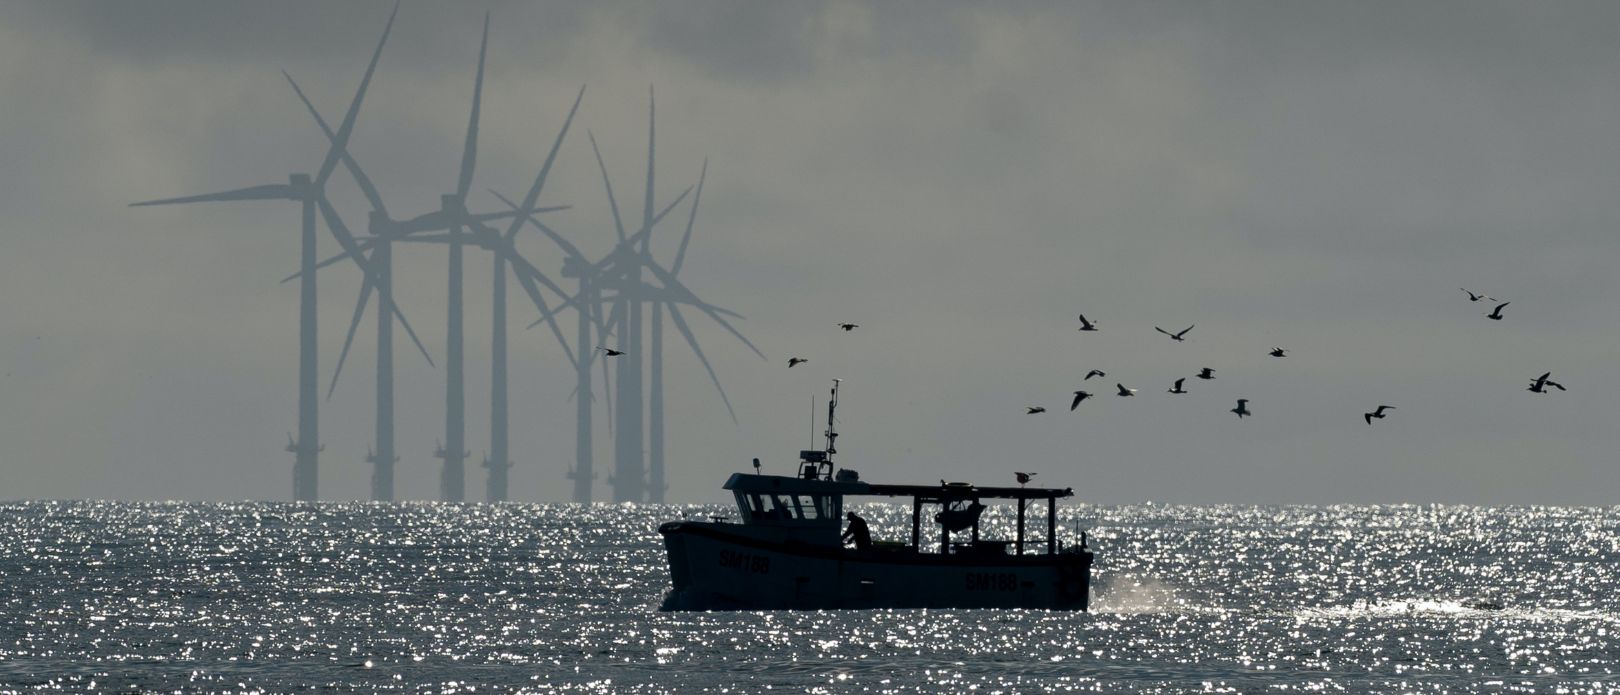 The picture shows a ship in front of off-shore wind mills.